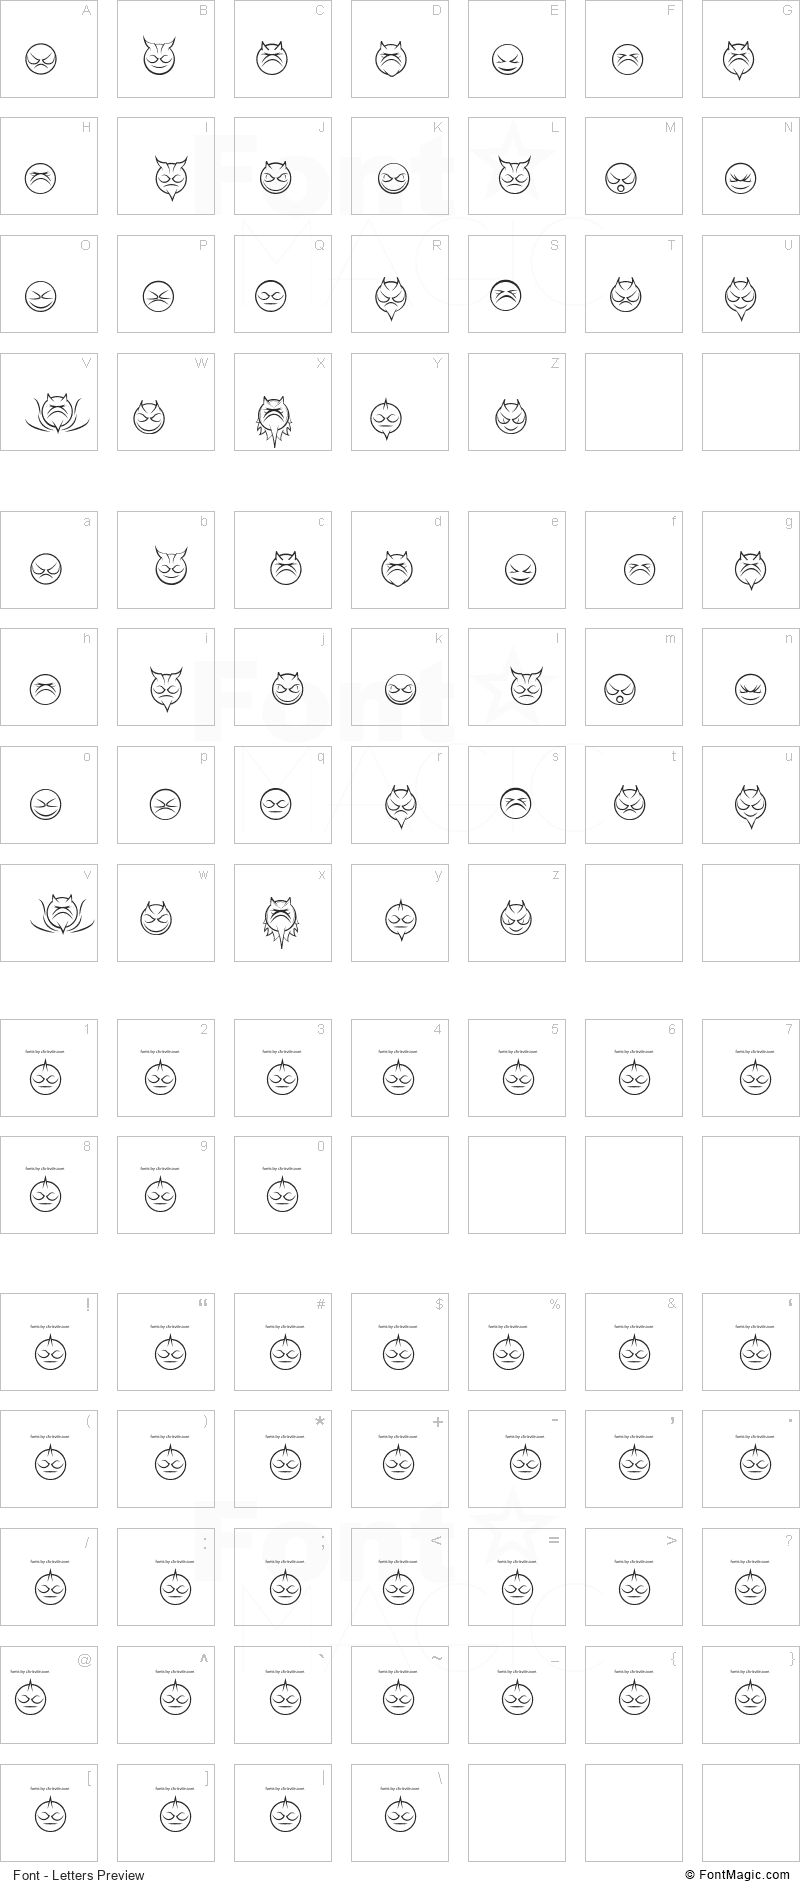 Some Devil Faces Font - All Latters Preview Chart